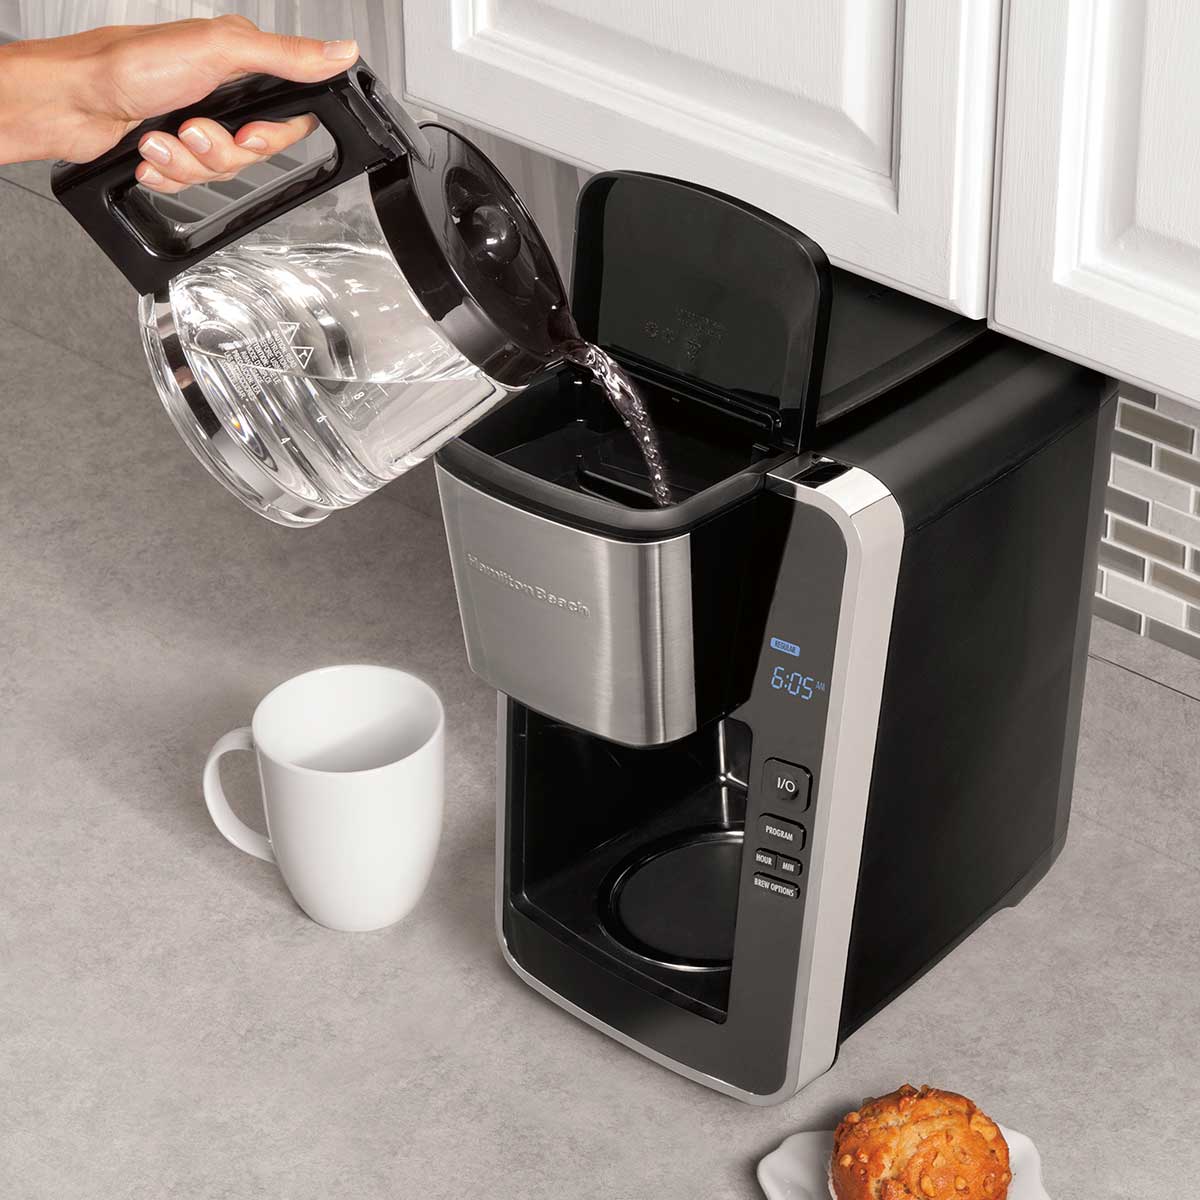 Enter for a Chance to Win a Hamilton Beach® Programmable Easy Access Deluxe Coffee Maker